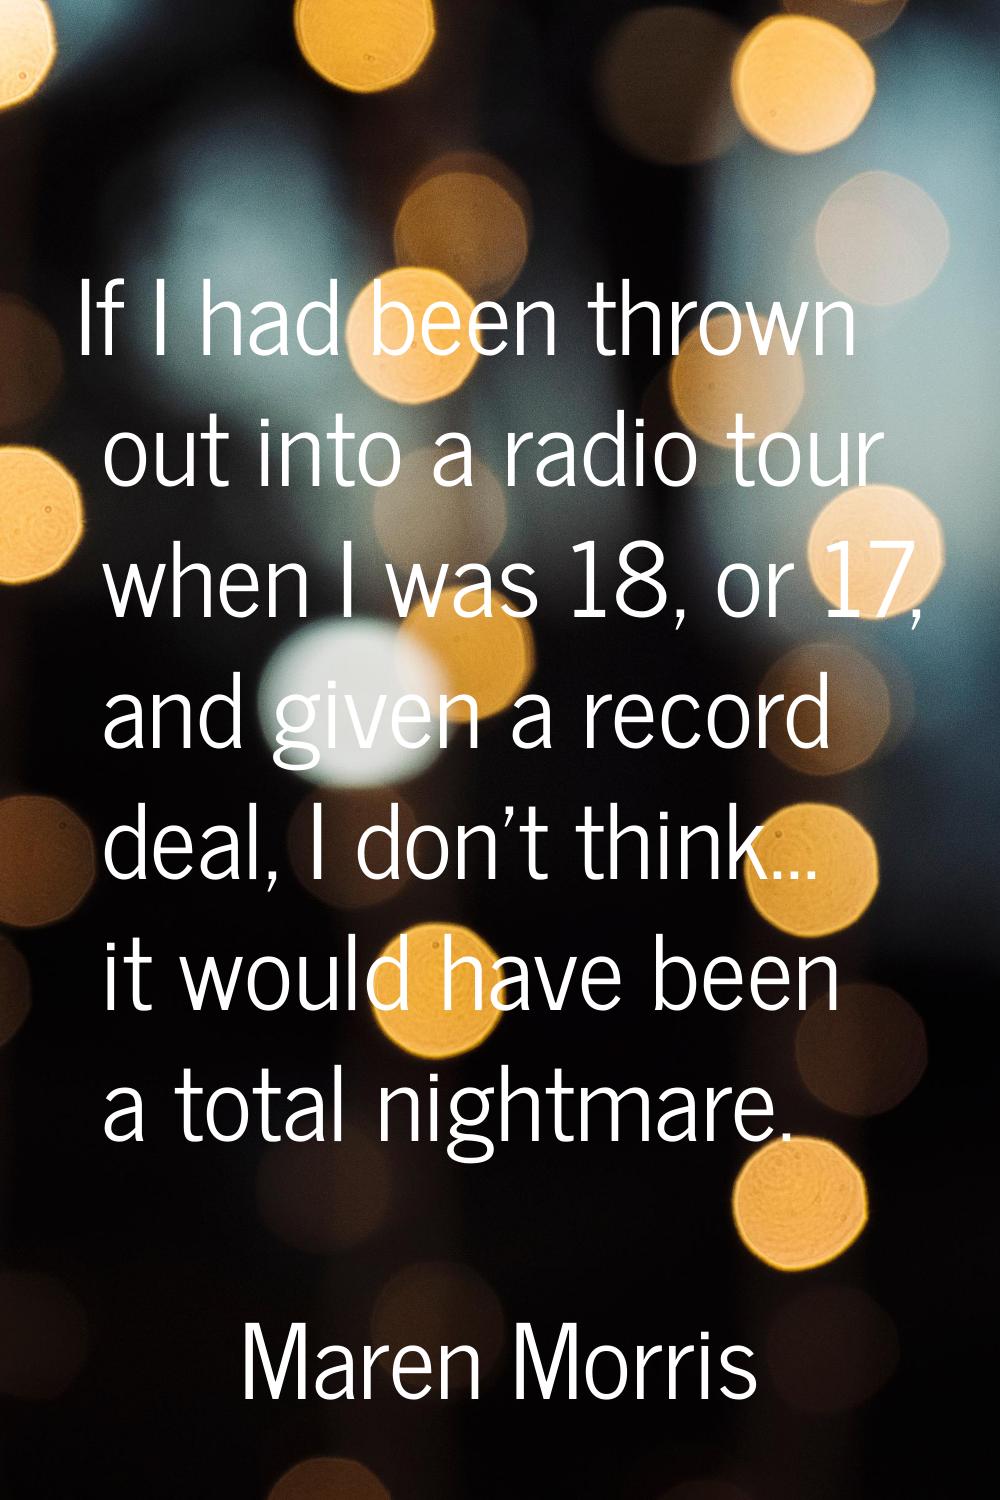 If I had been thrown out into a radio tour when I was 18, or 17, and given a record deal, I don't t